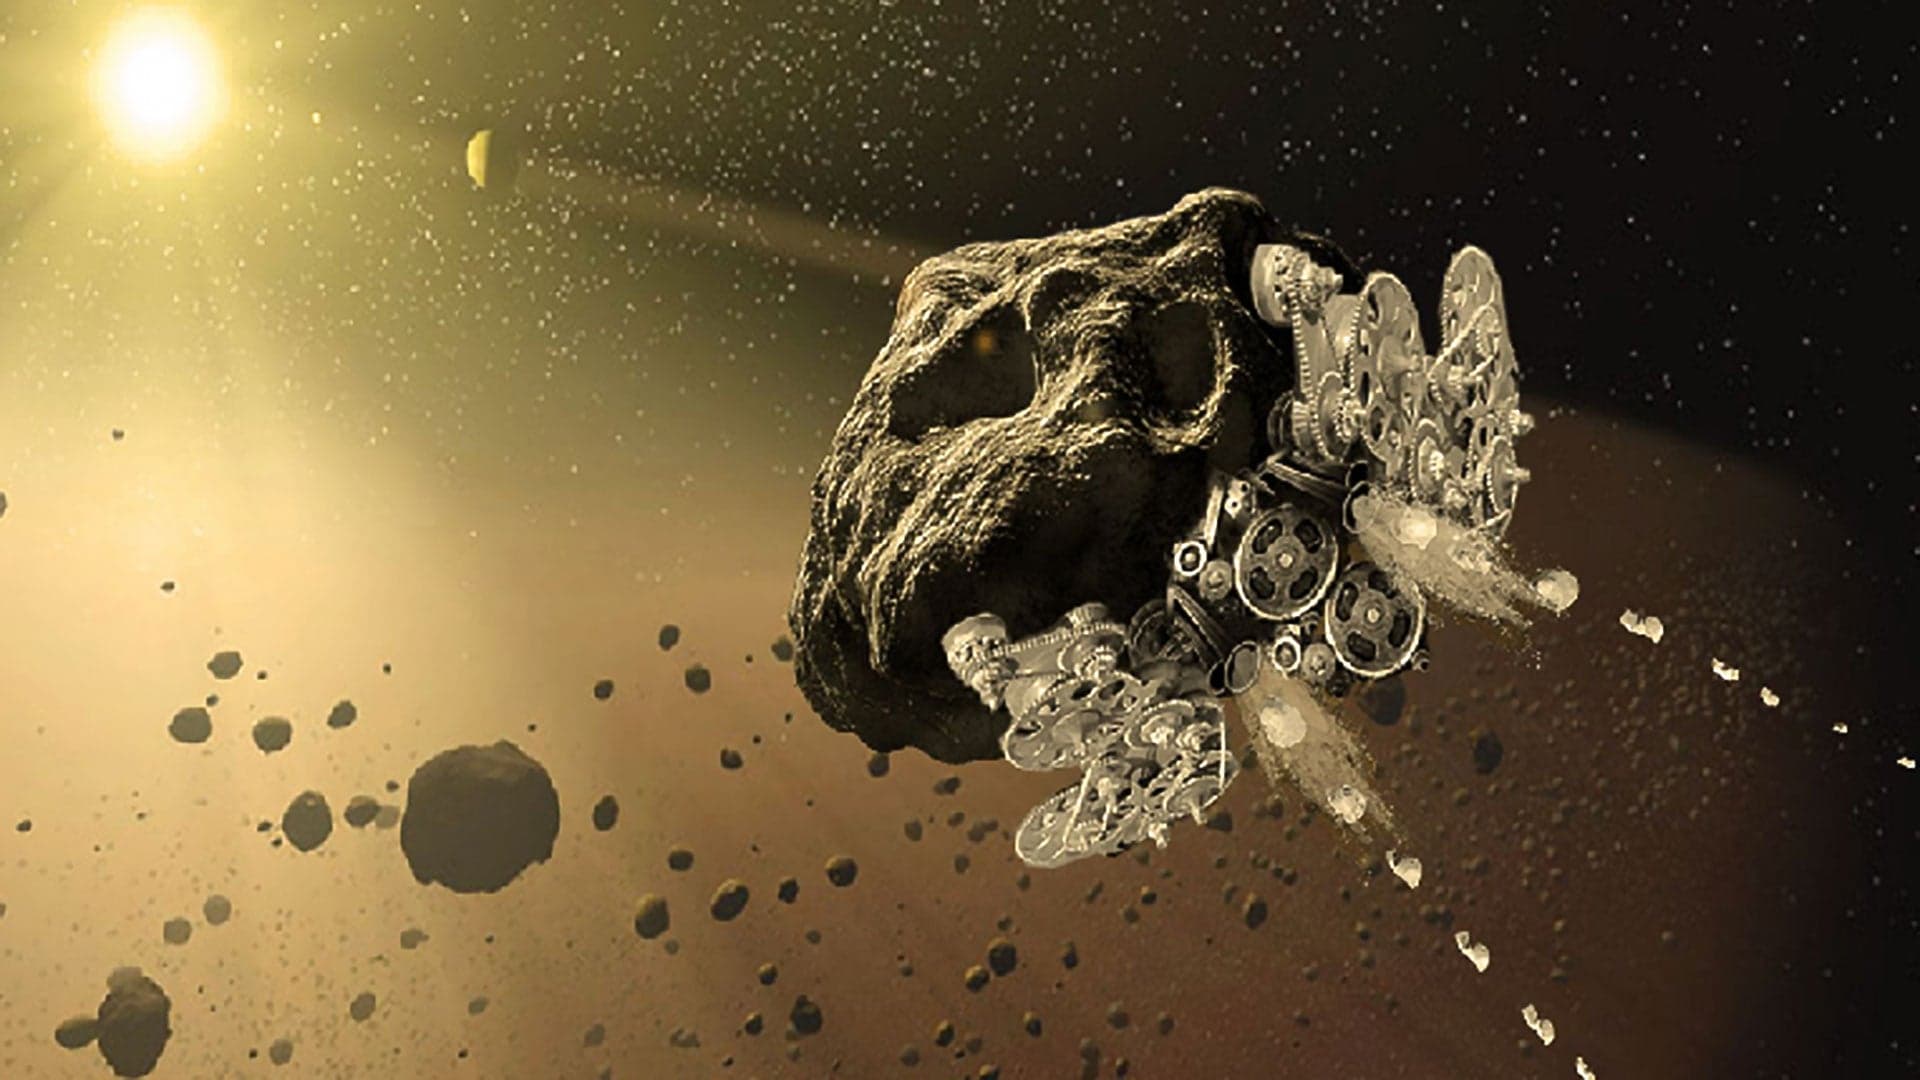 NASA’s Project RAMA Would Use Asteroids to Play Asteroids